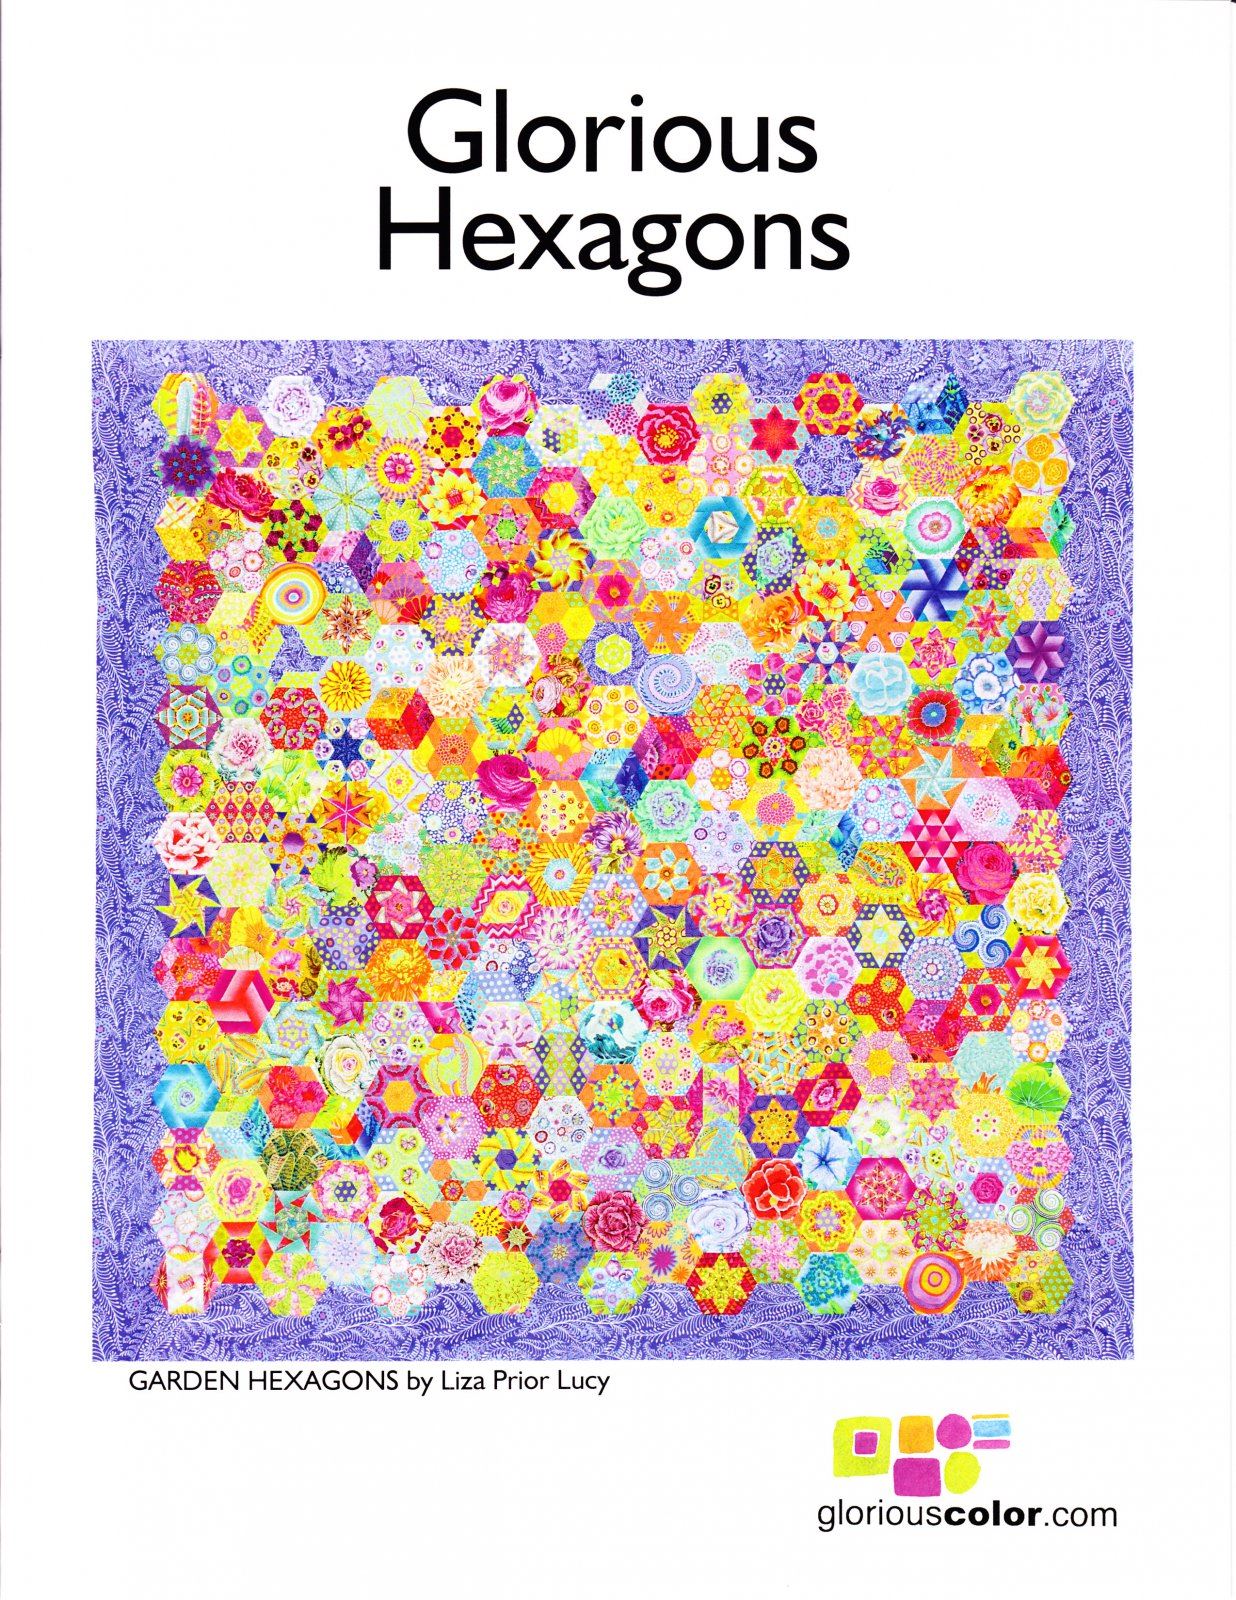 Glorious Hexagons By Liza Lucy + Kim McLean